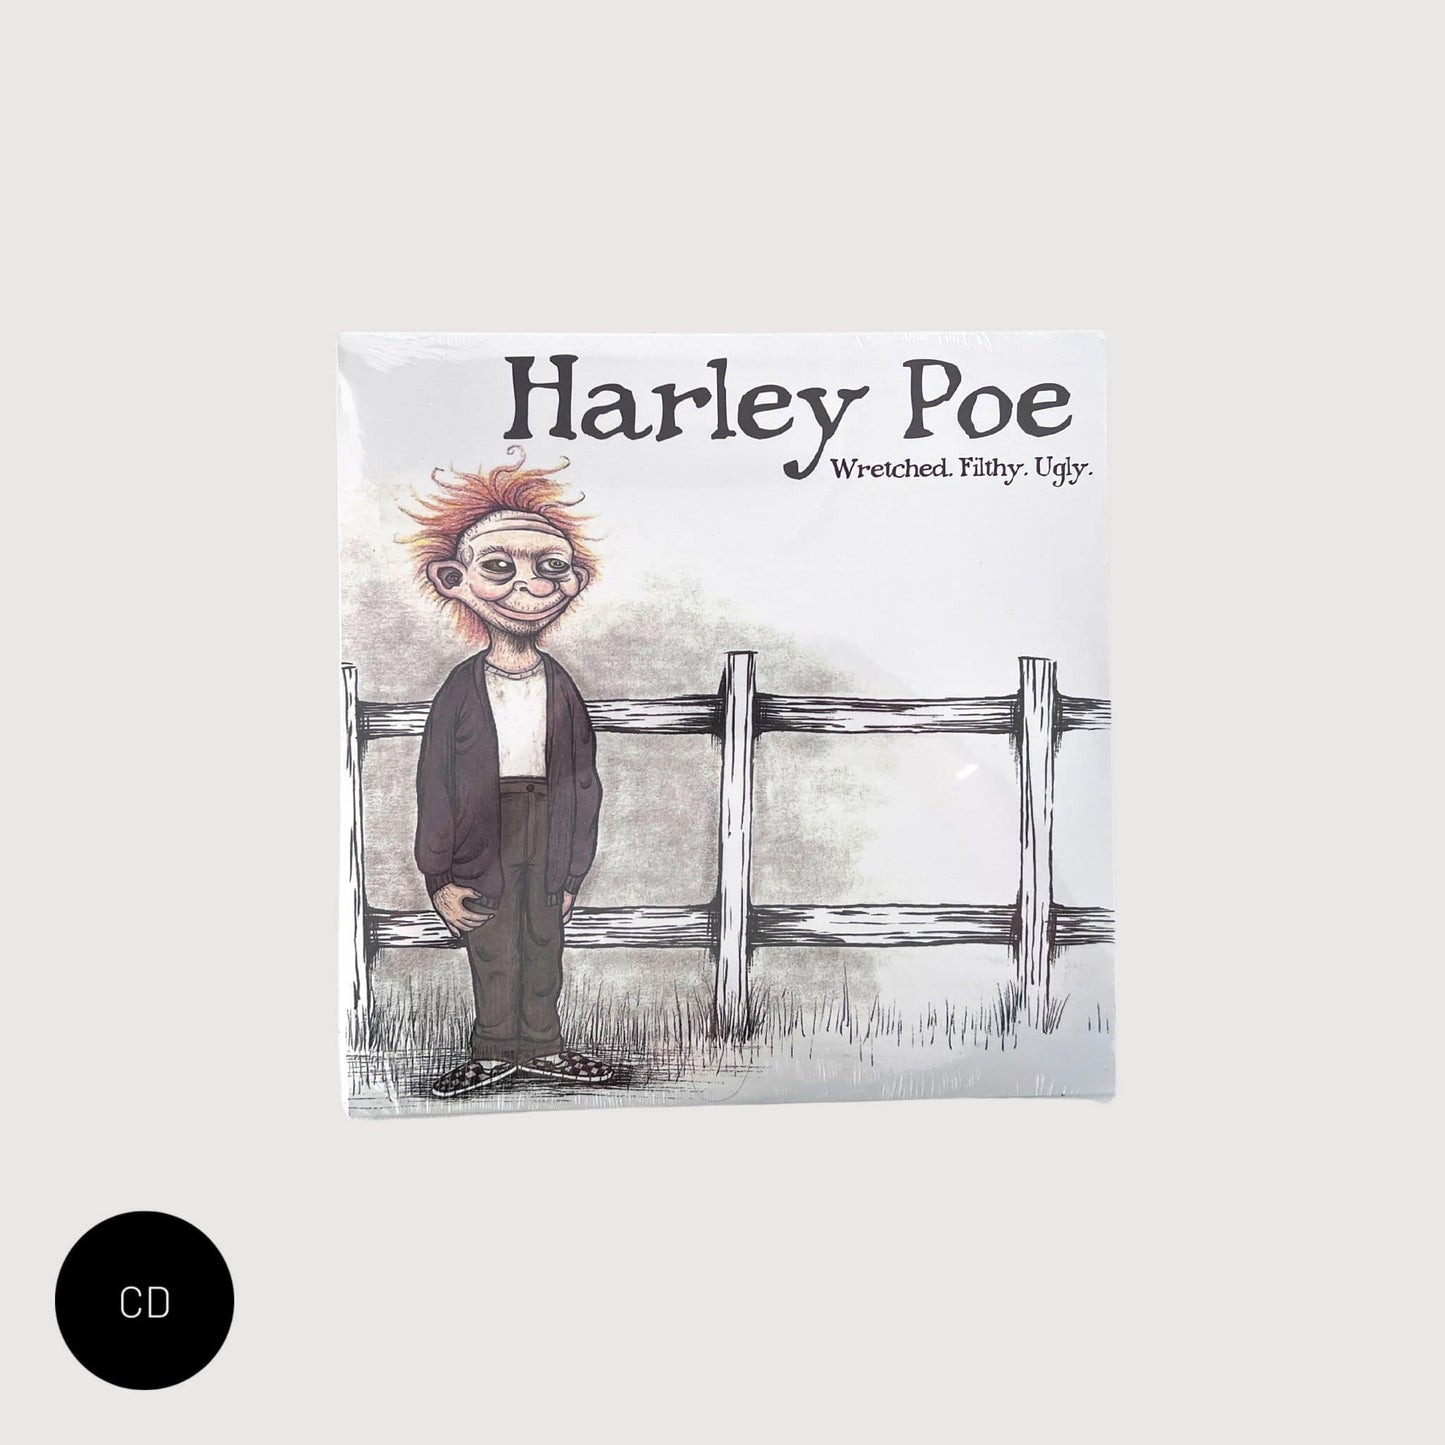 Harley Poe: Wretched. Filthy. Ugly. CD 2020 Reissue